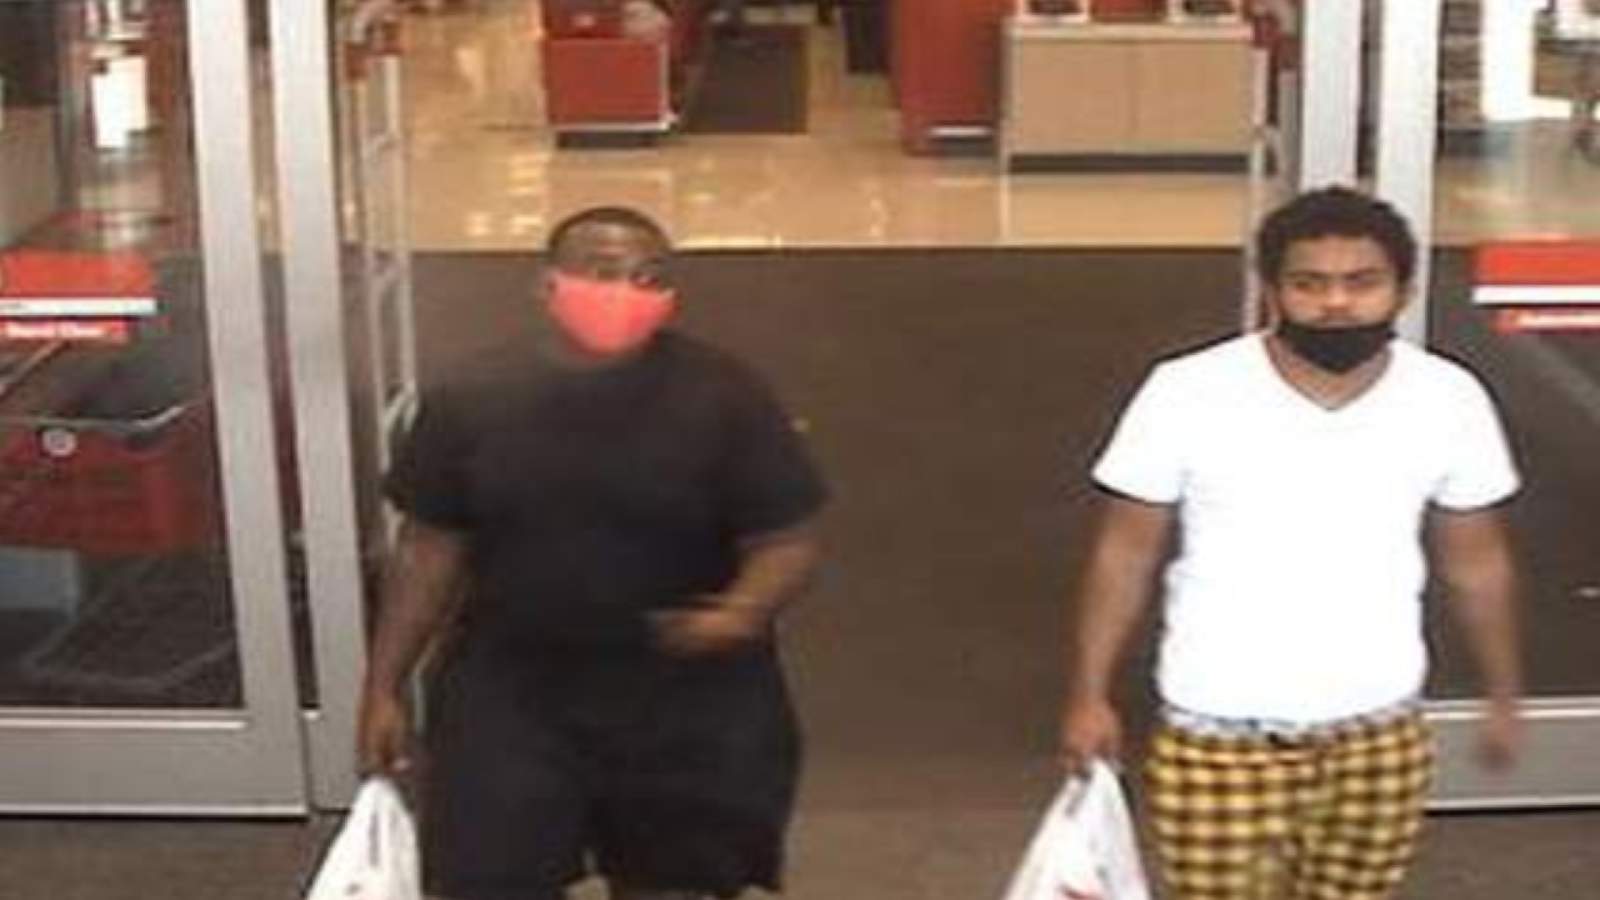 2 wanted after shopper robbed, dragged by vehicle outside Target at The Rim, police say